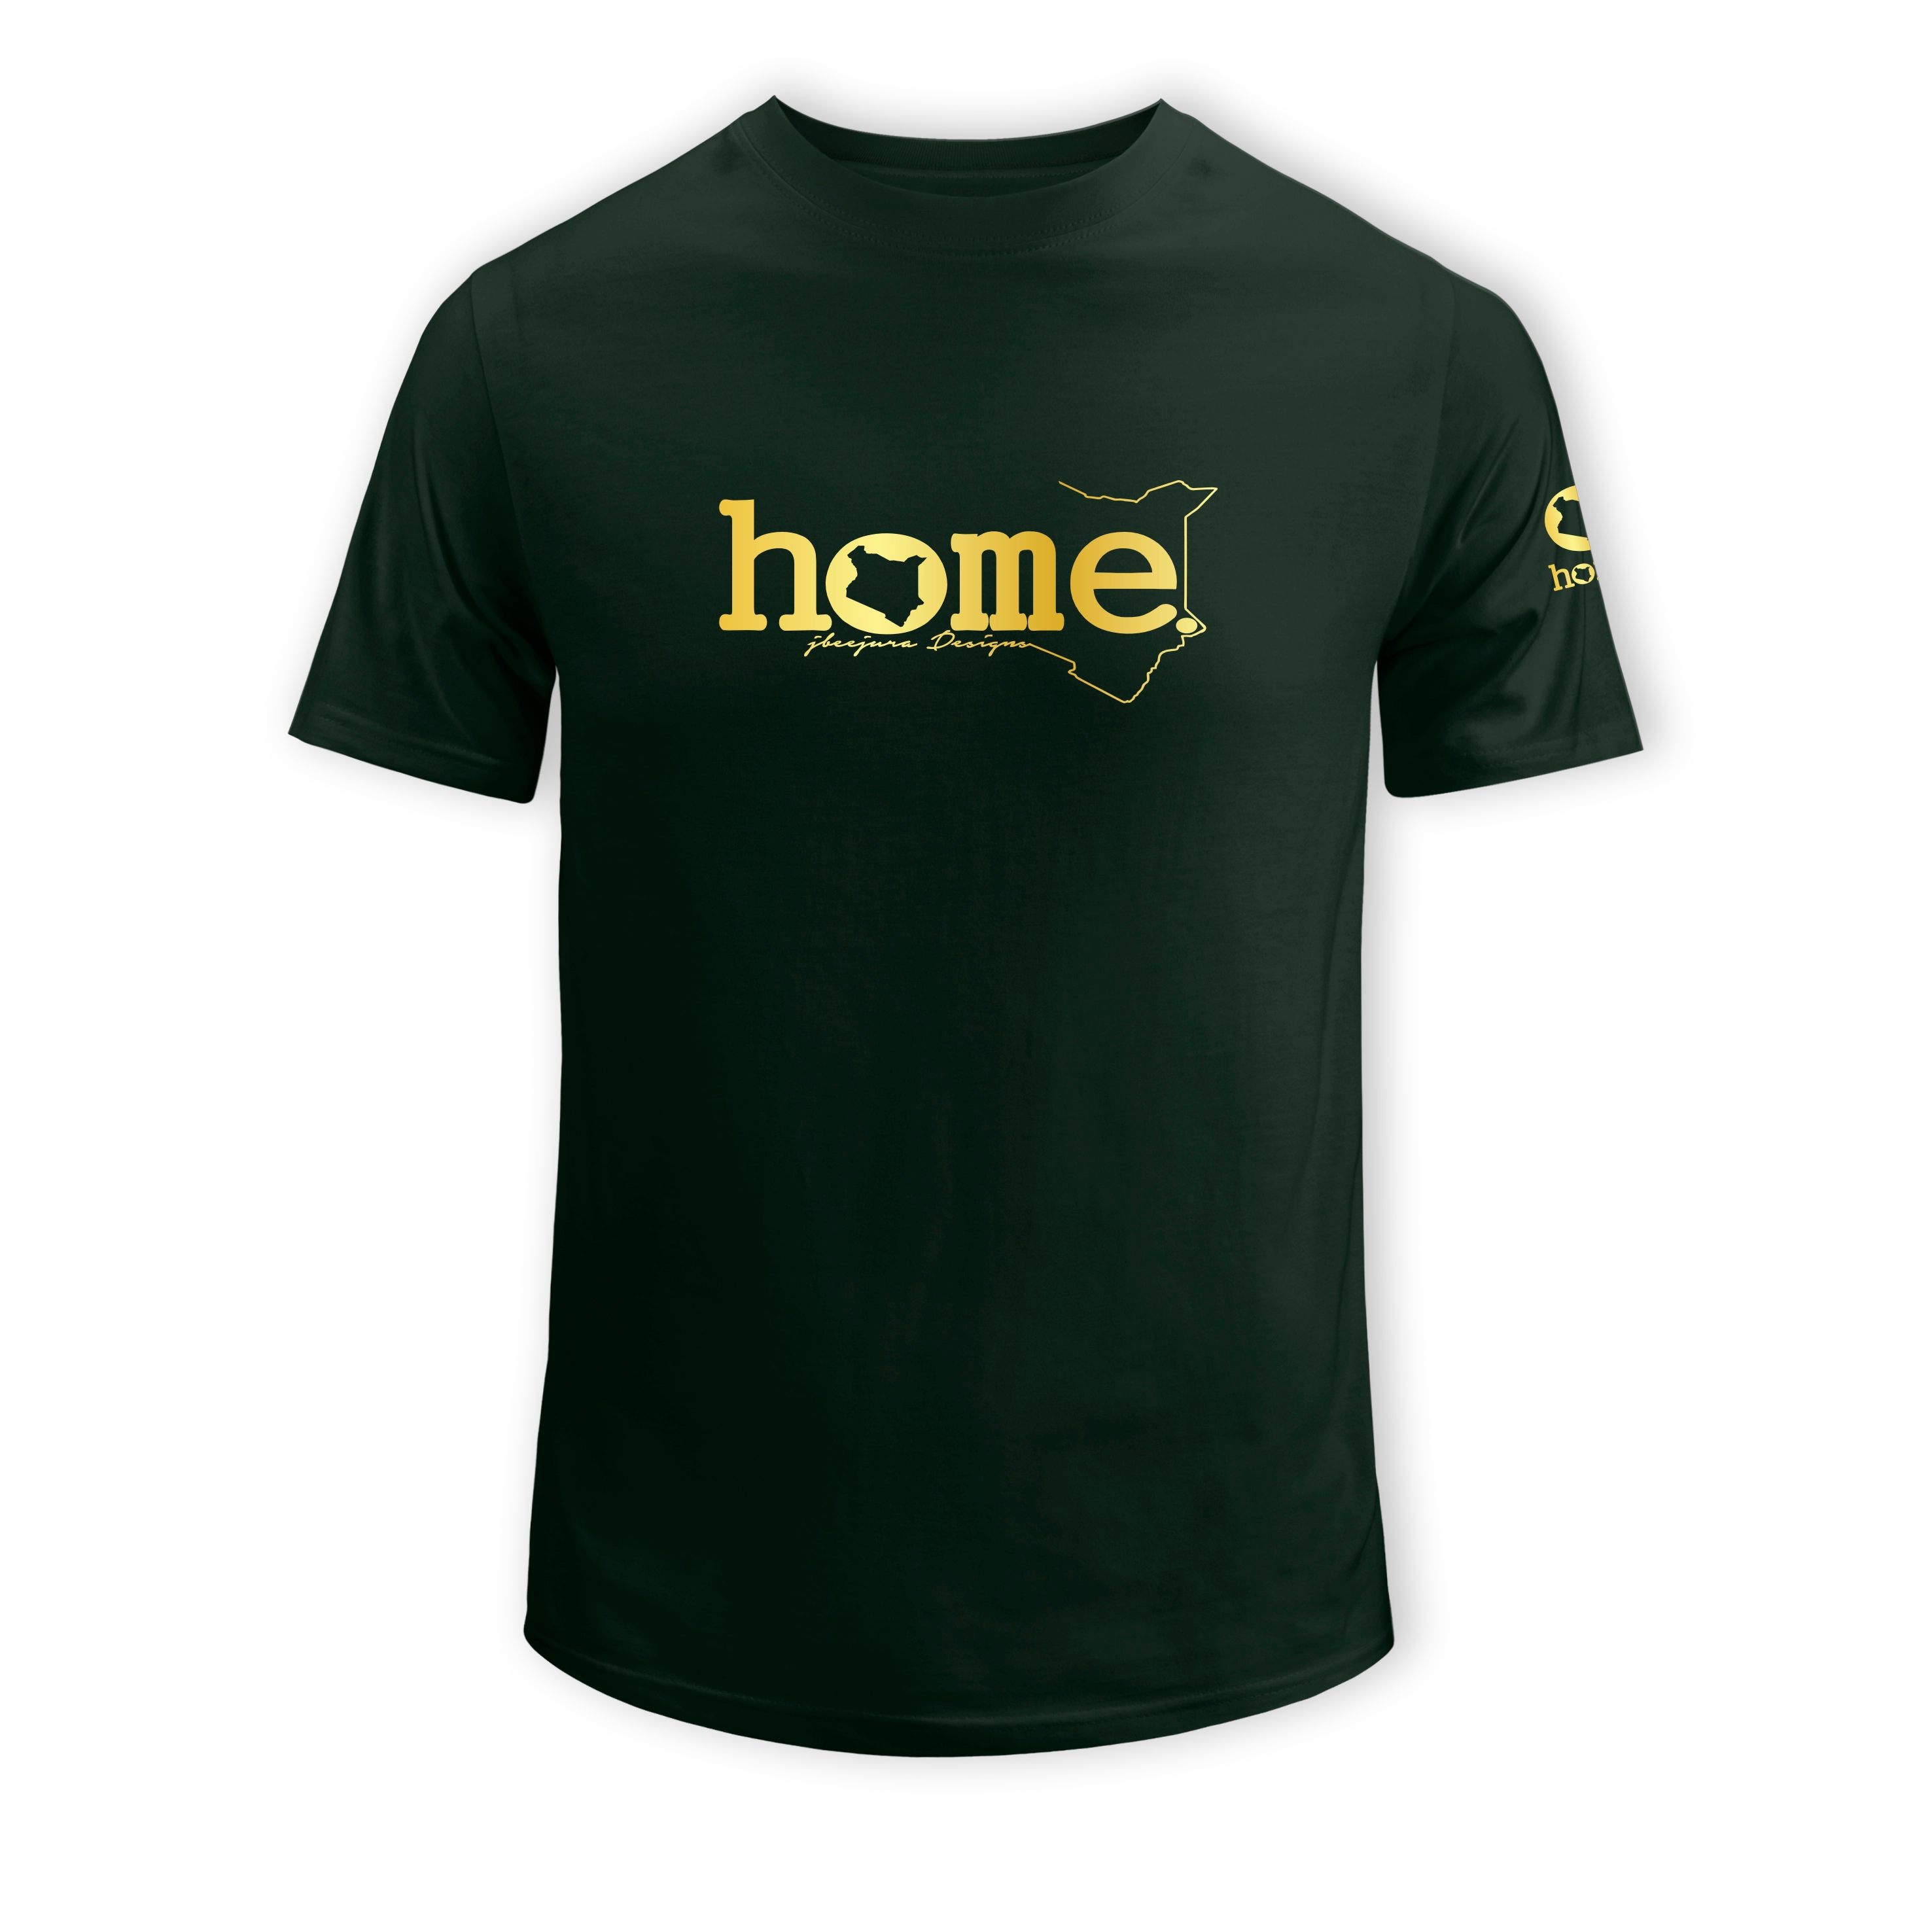 home_254 KIDS SHORT-SLEEVED FOREST GREEN T-SHIRT WITH A GOLD CLASSIC WORDS PRINT – COTTON PLUS FABRIC